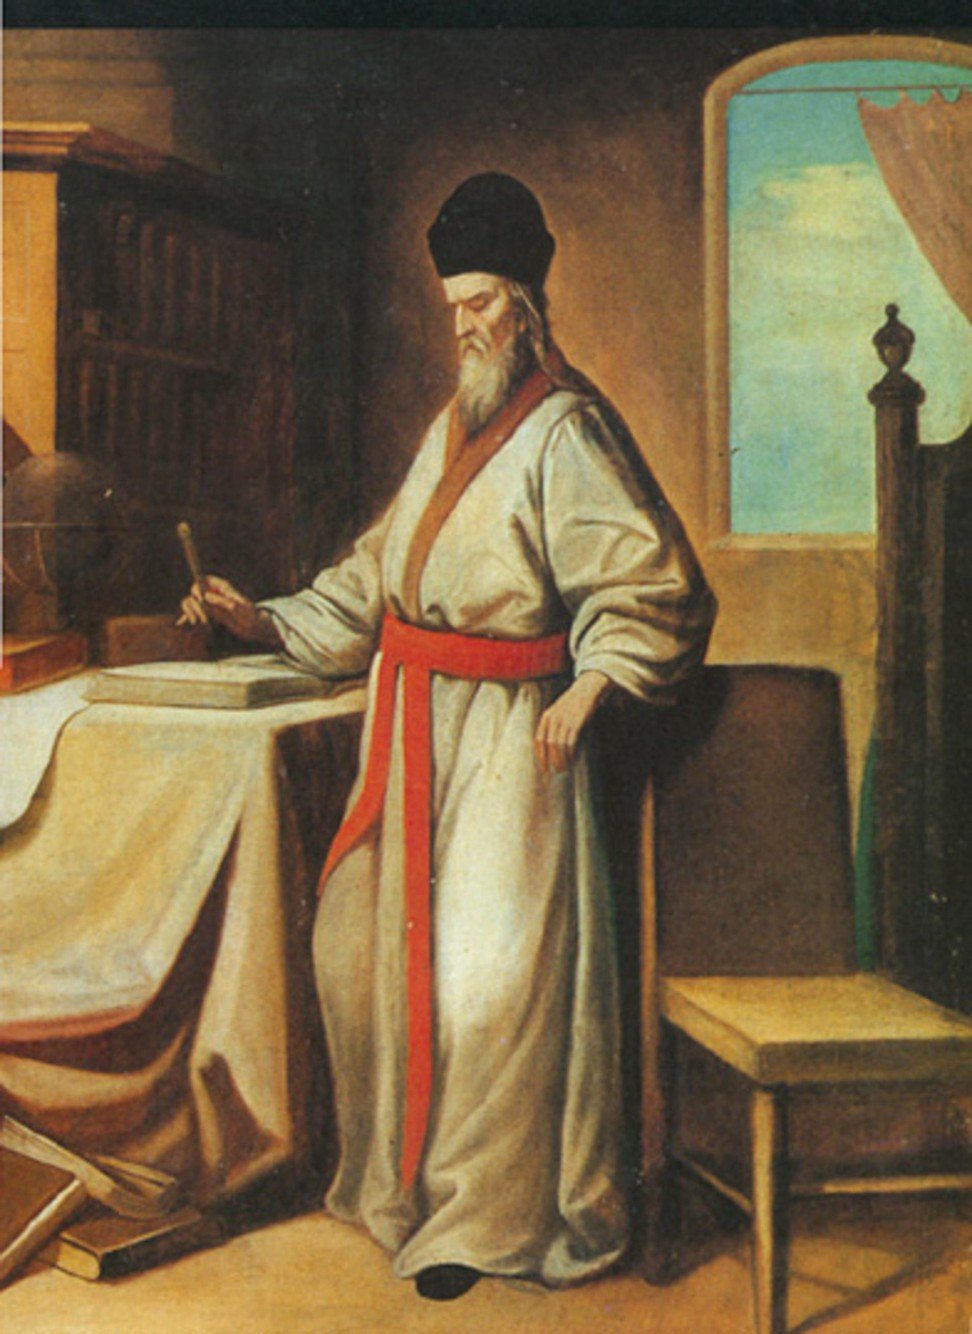 A painting of the Jesuit priest. Photo: Alamy